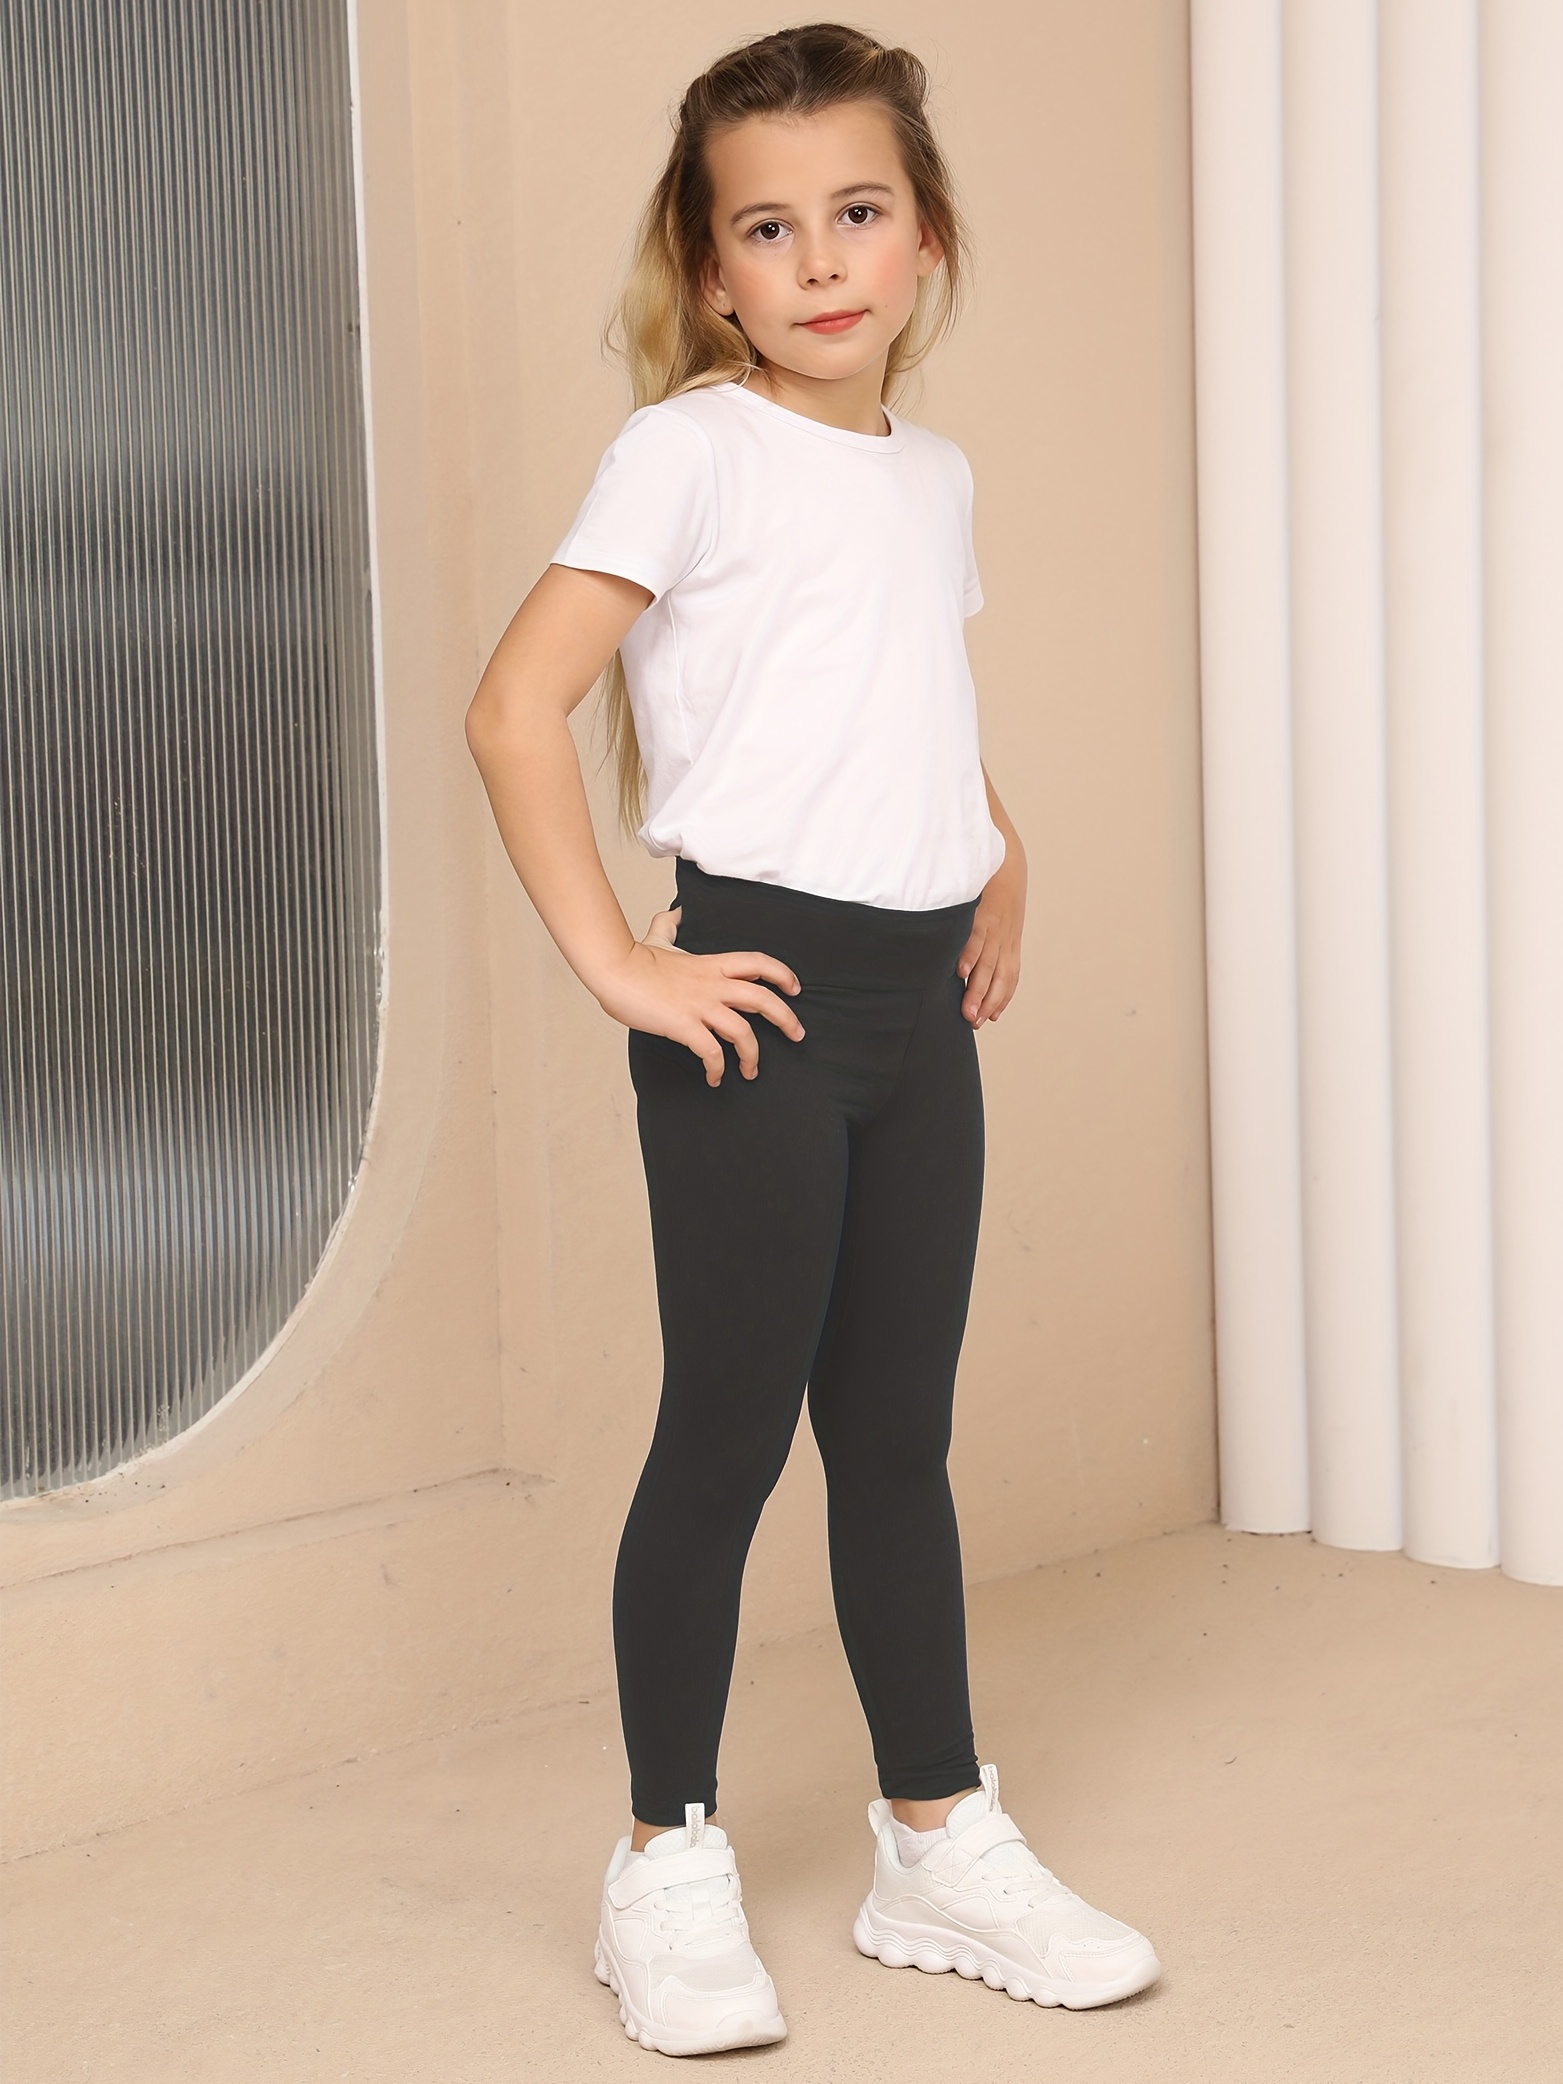 Buy Soft Hug Girls Cotton Solid Non-Transparent Ankle Length Leggings(Pack  of 2) at